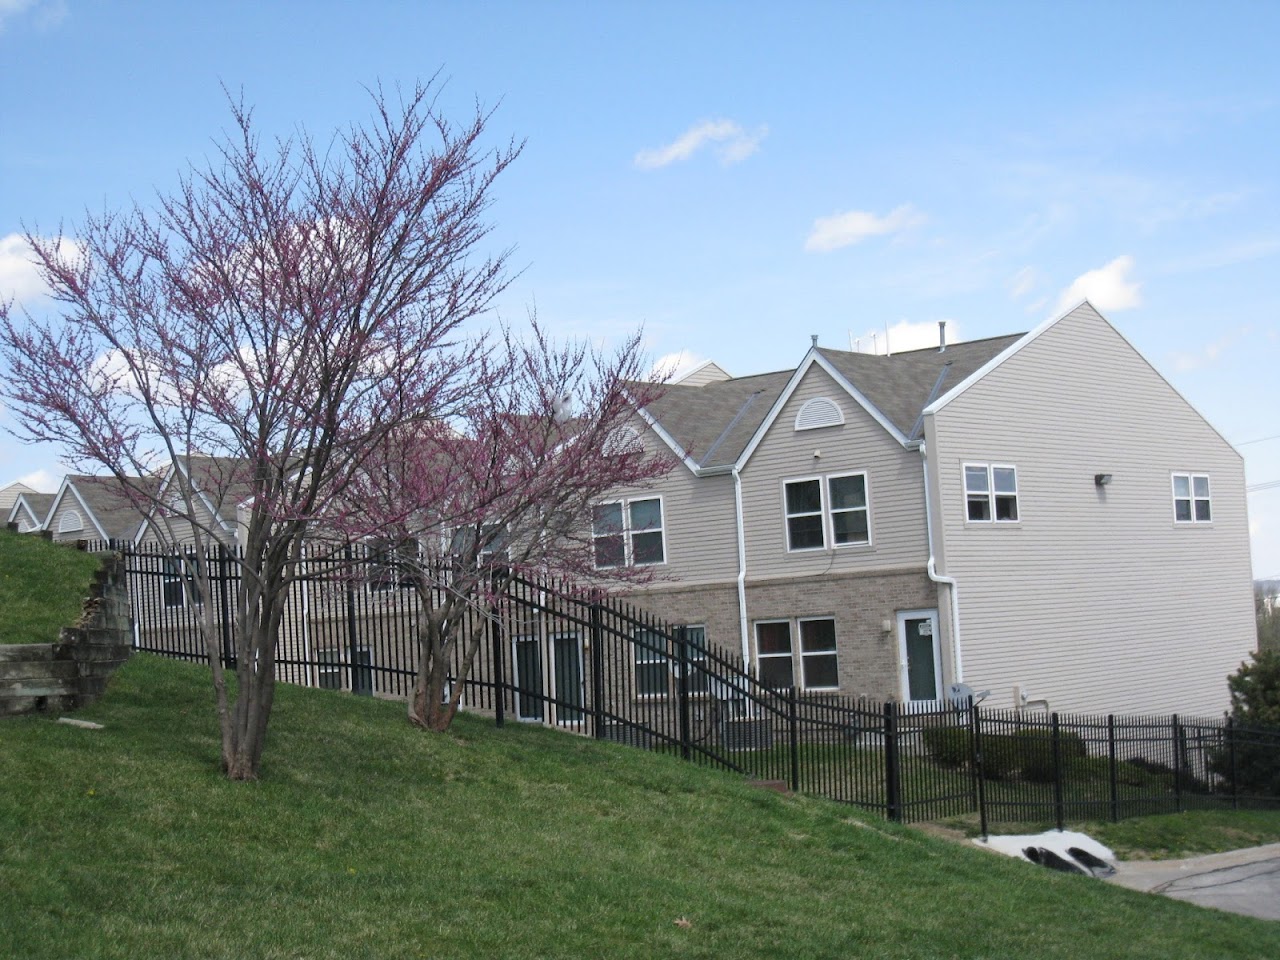 Photo of KELLOM EAST. Affordable housing located at 2507 CALDWELL ST OMAHA, NE 68131